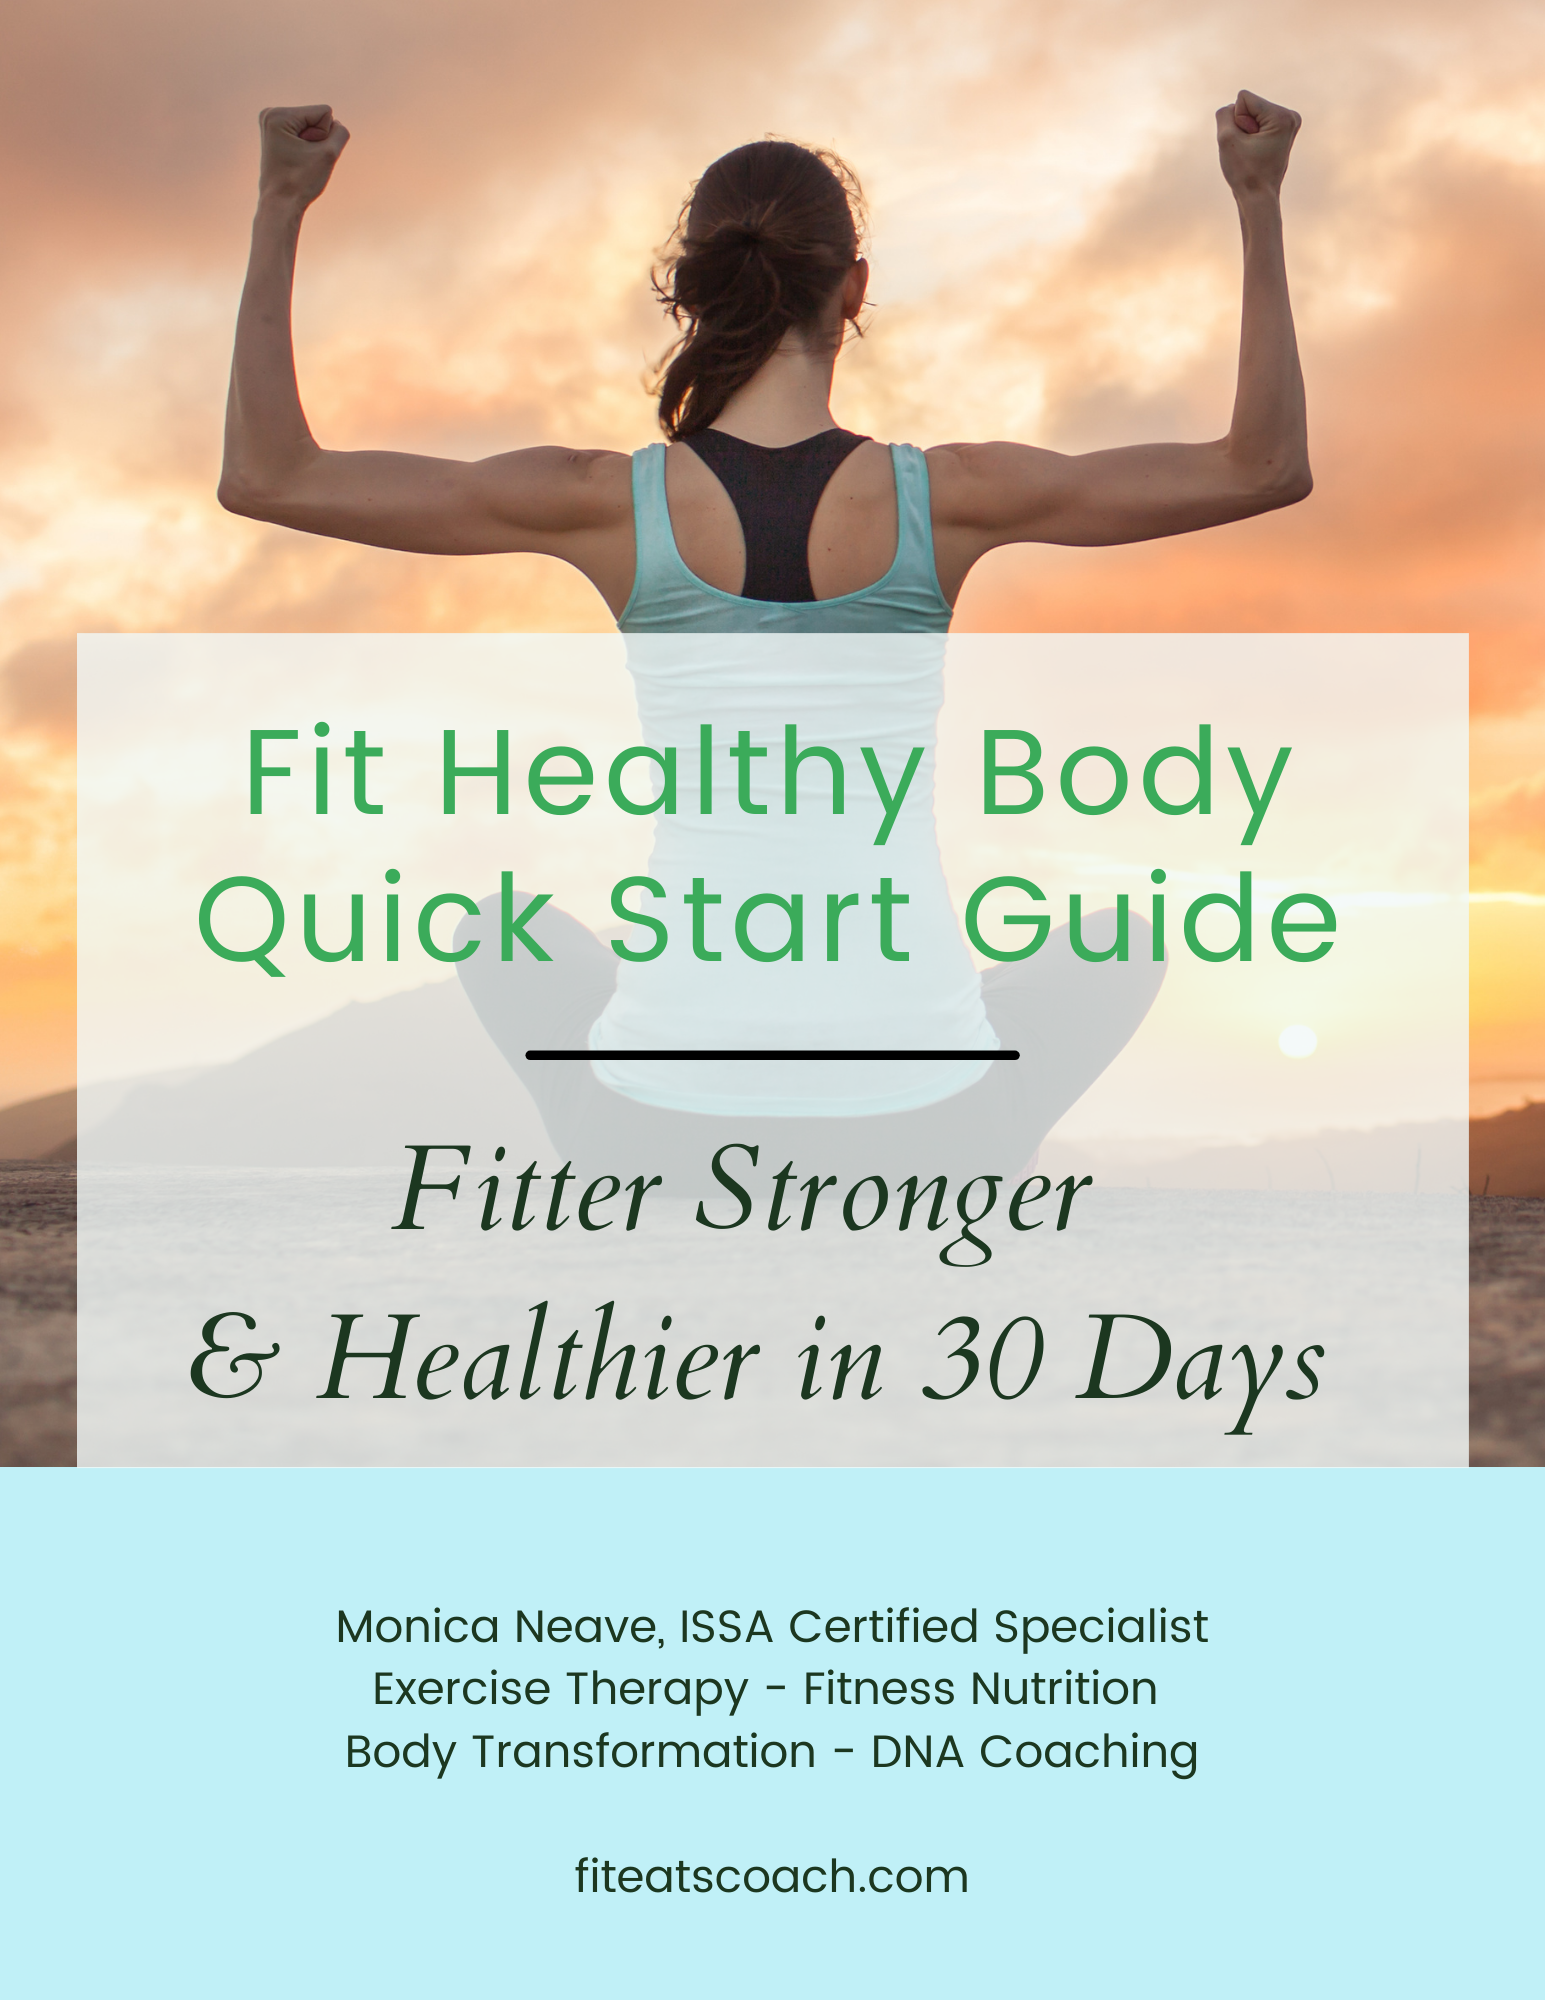 Fit Healthy Body Quick Start Guide